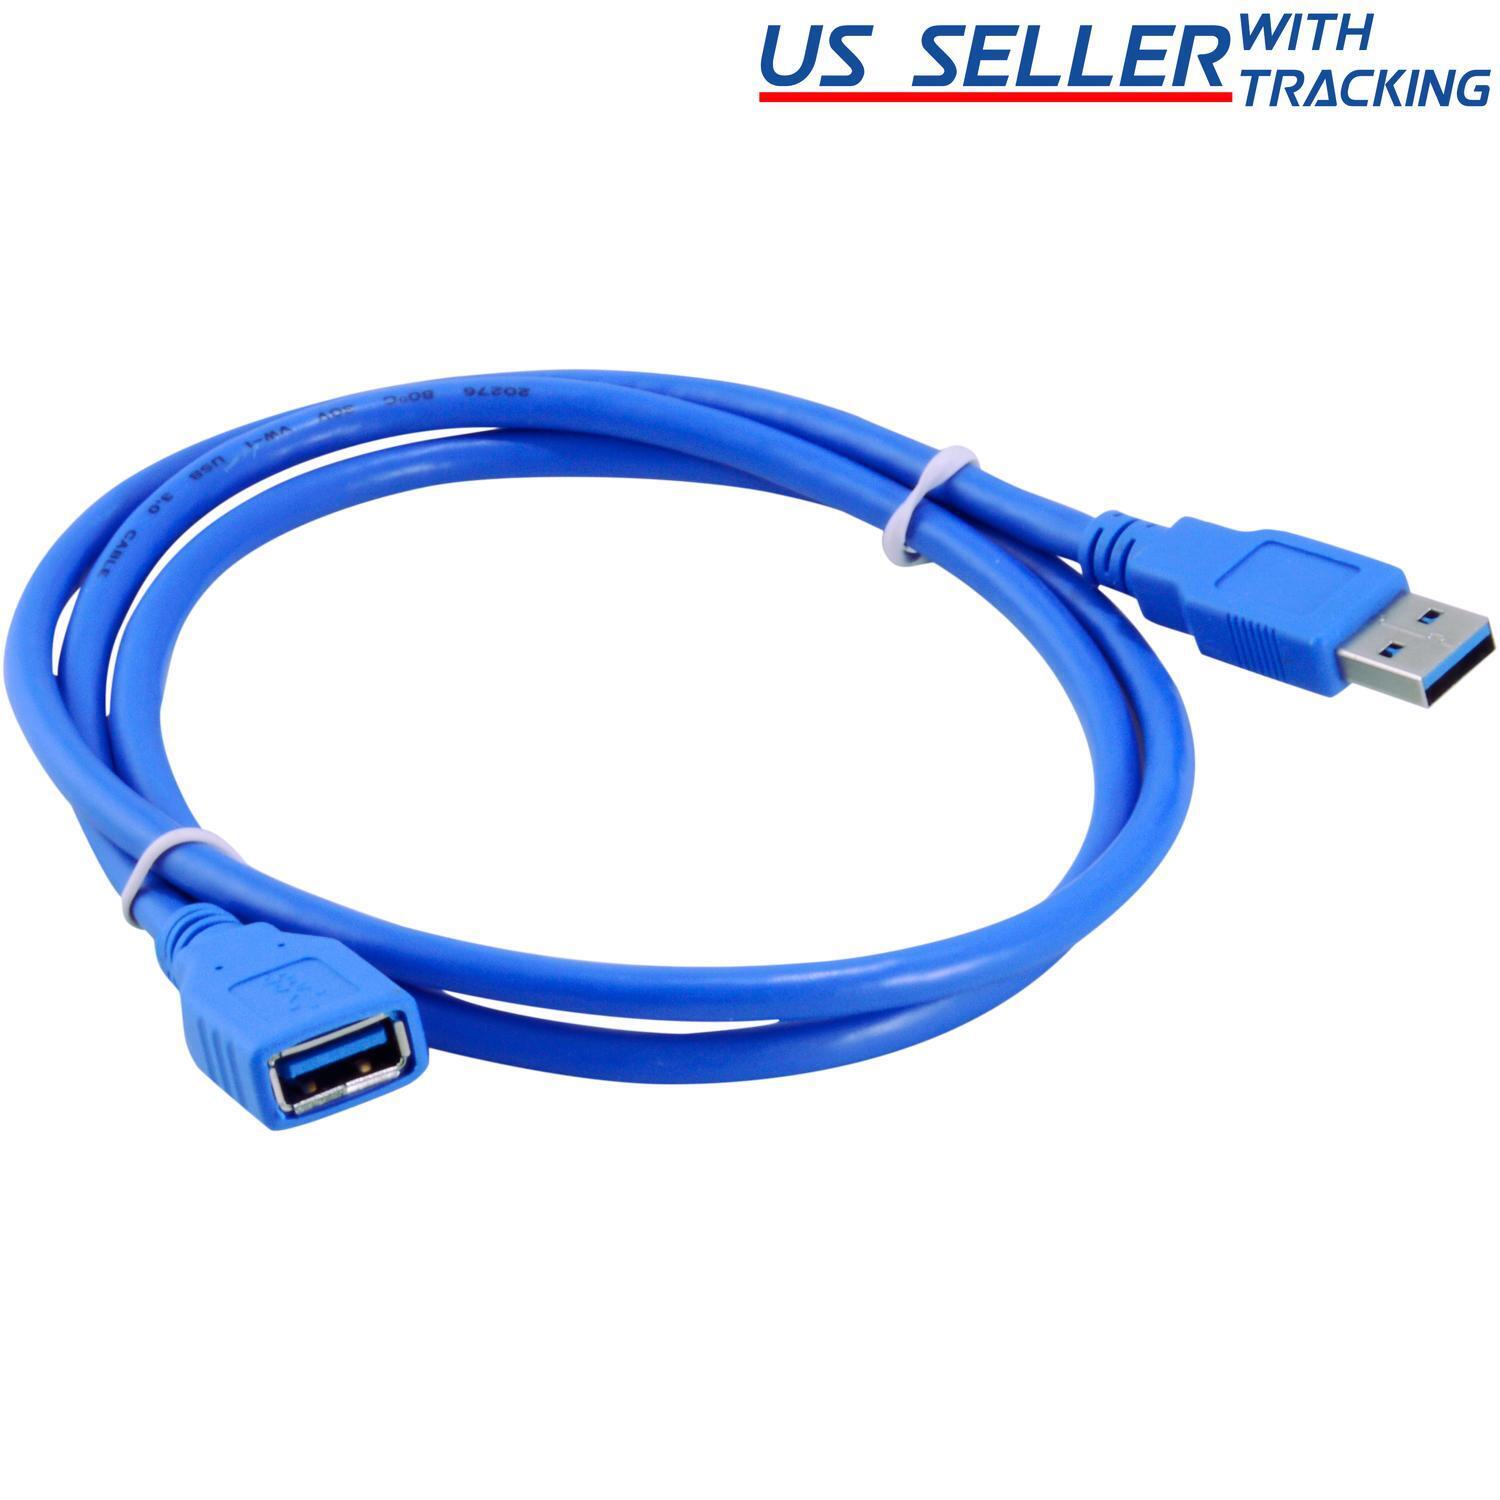 (2-pack) 3Ft/1M USB 3.0 Extension Cable, A-Male to A-Female Data Cord, Blue